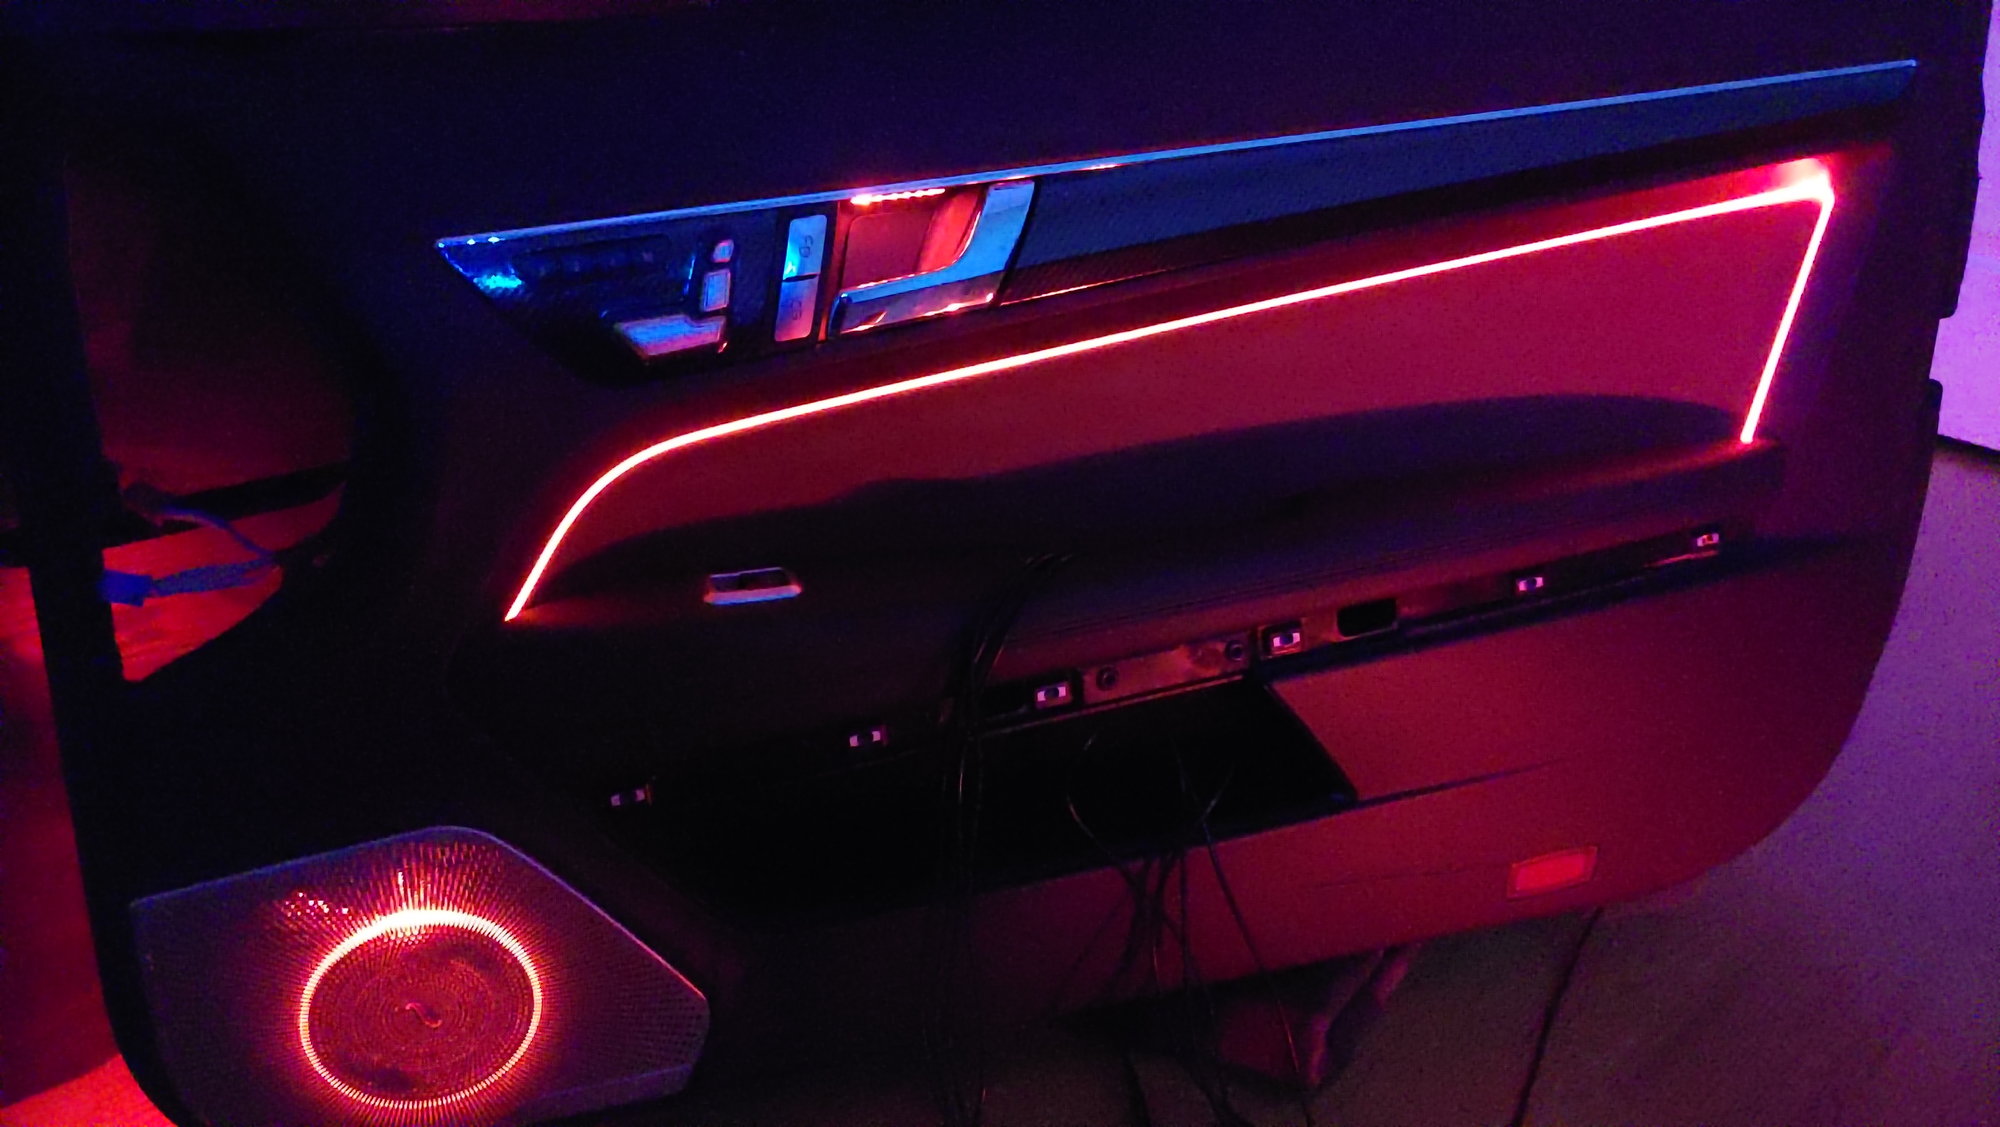 install ambient lighting in coupe - Page 2 - MBWorld.org Forums